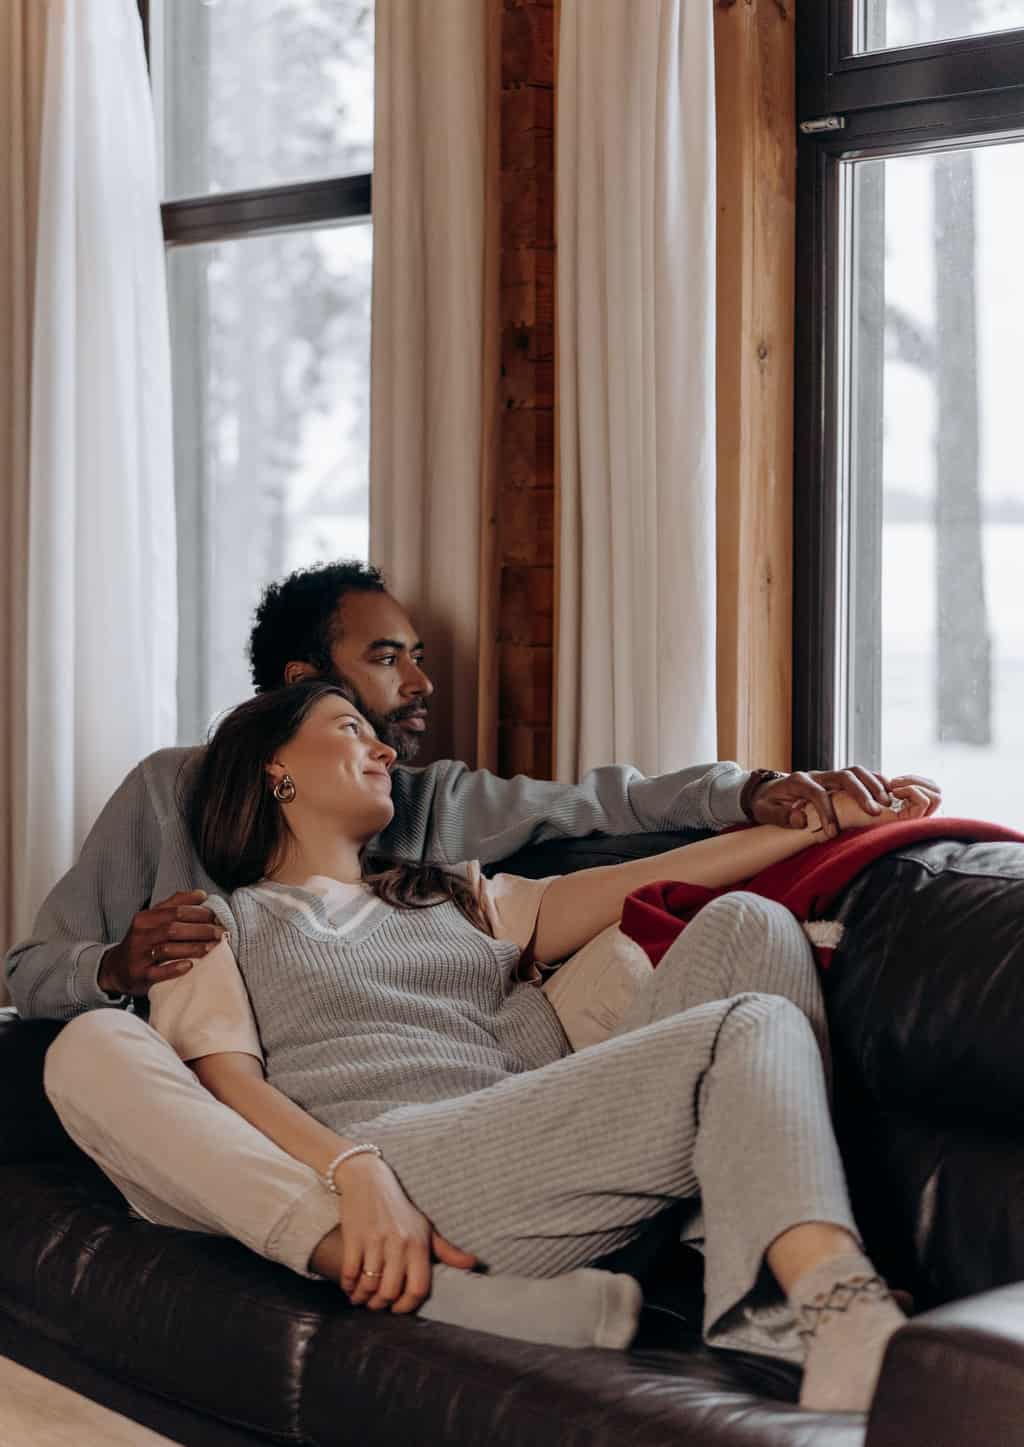 Man and Woman Sitting on Couch